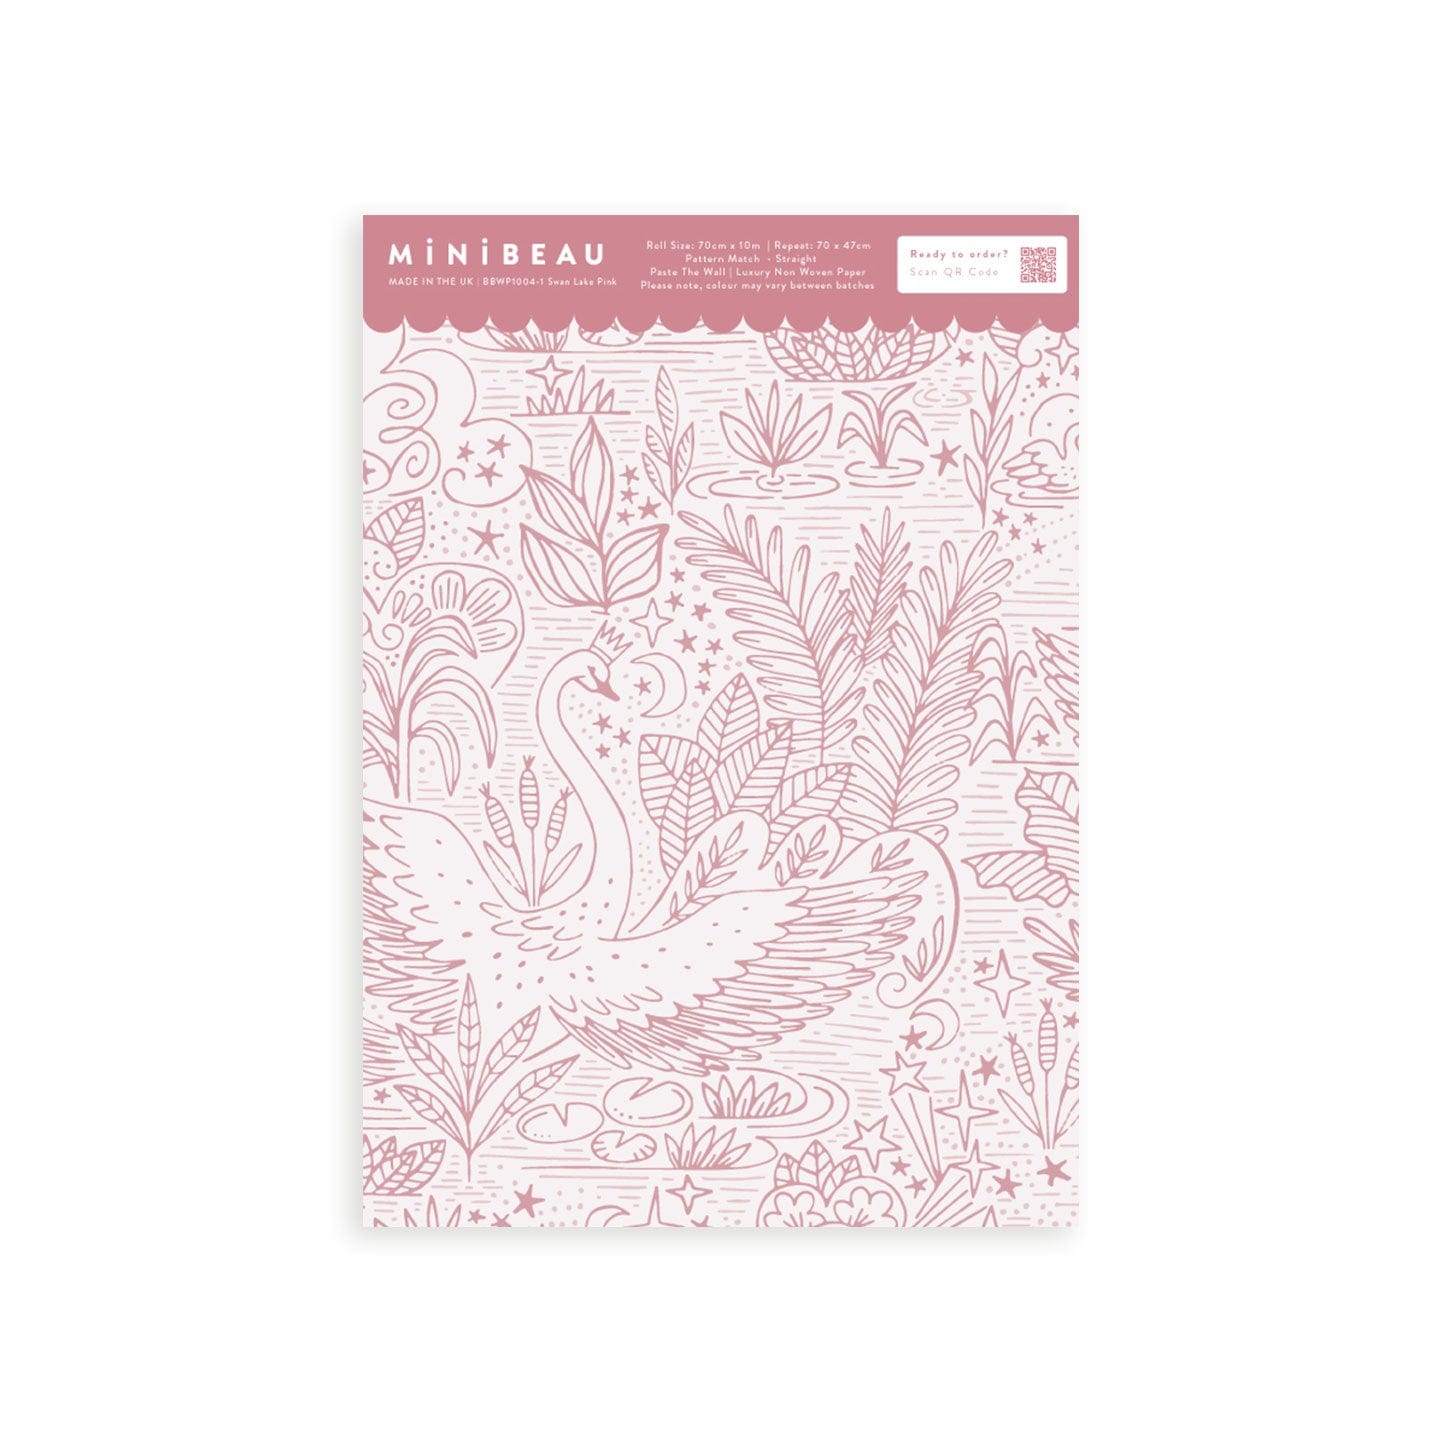 Wallpaper sample of very detailed floral print with swans gliding across a lake, flowers and leaves surround them. The print is line work and is all in pink